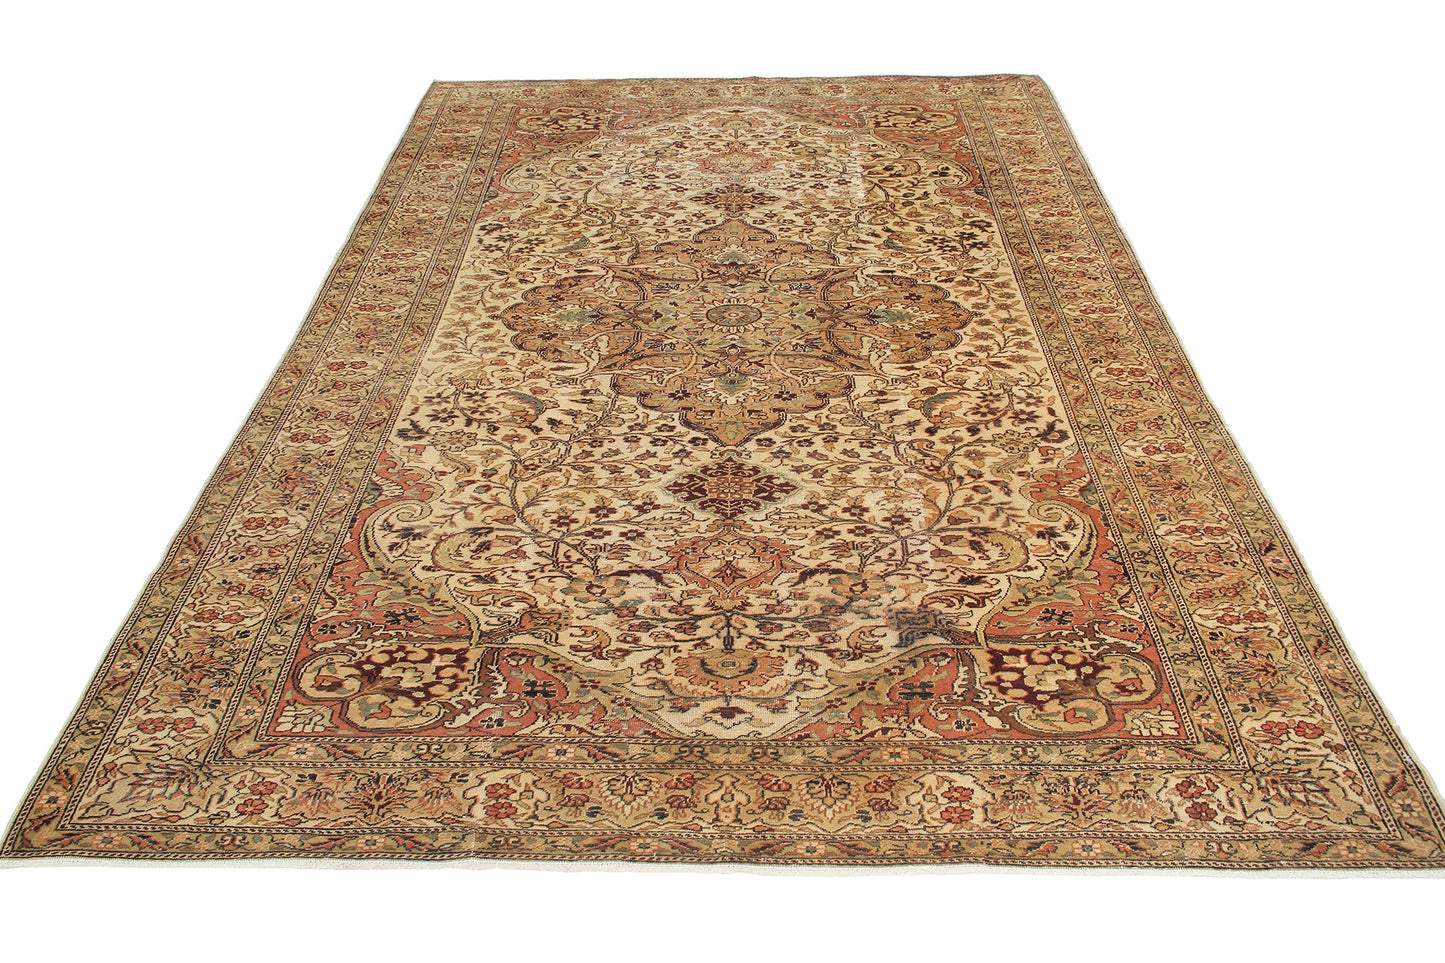 Vintage Turkish Rug With a Traditional Antique Design product image #27556254384298